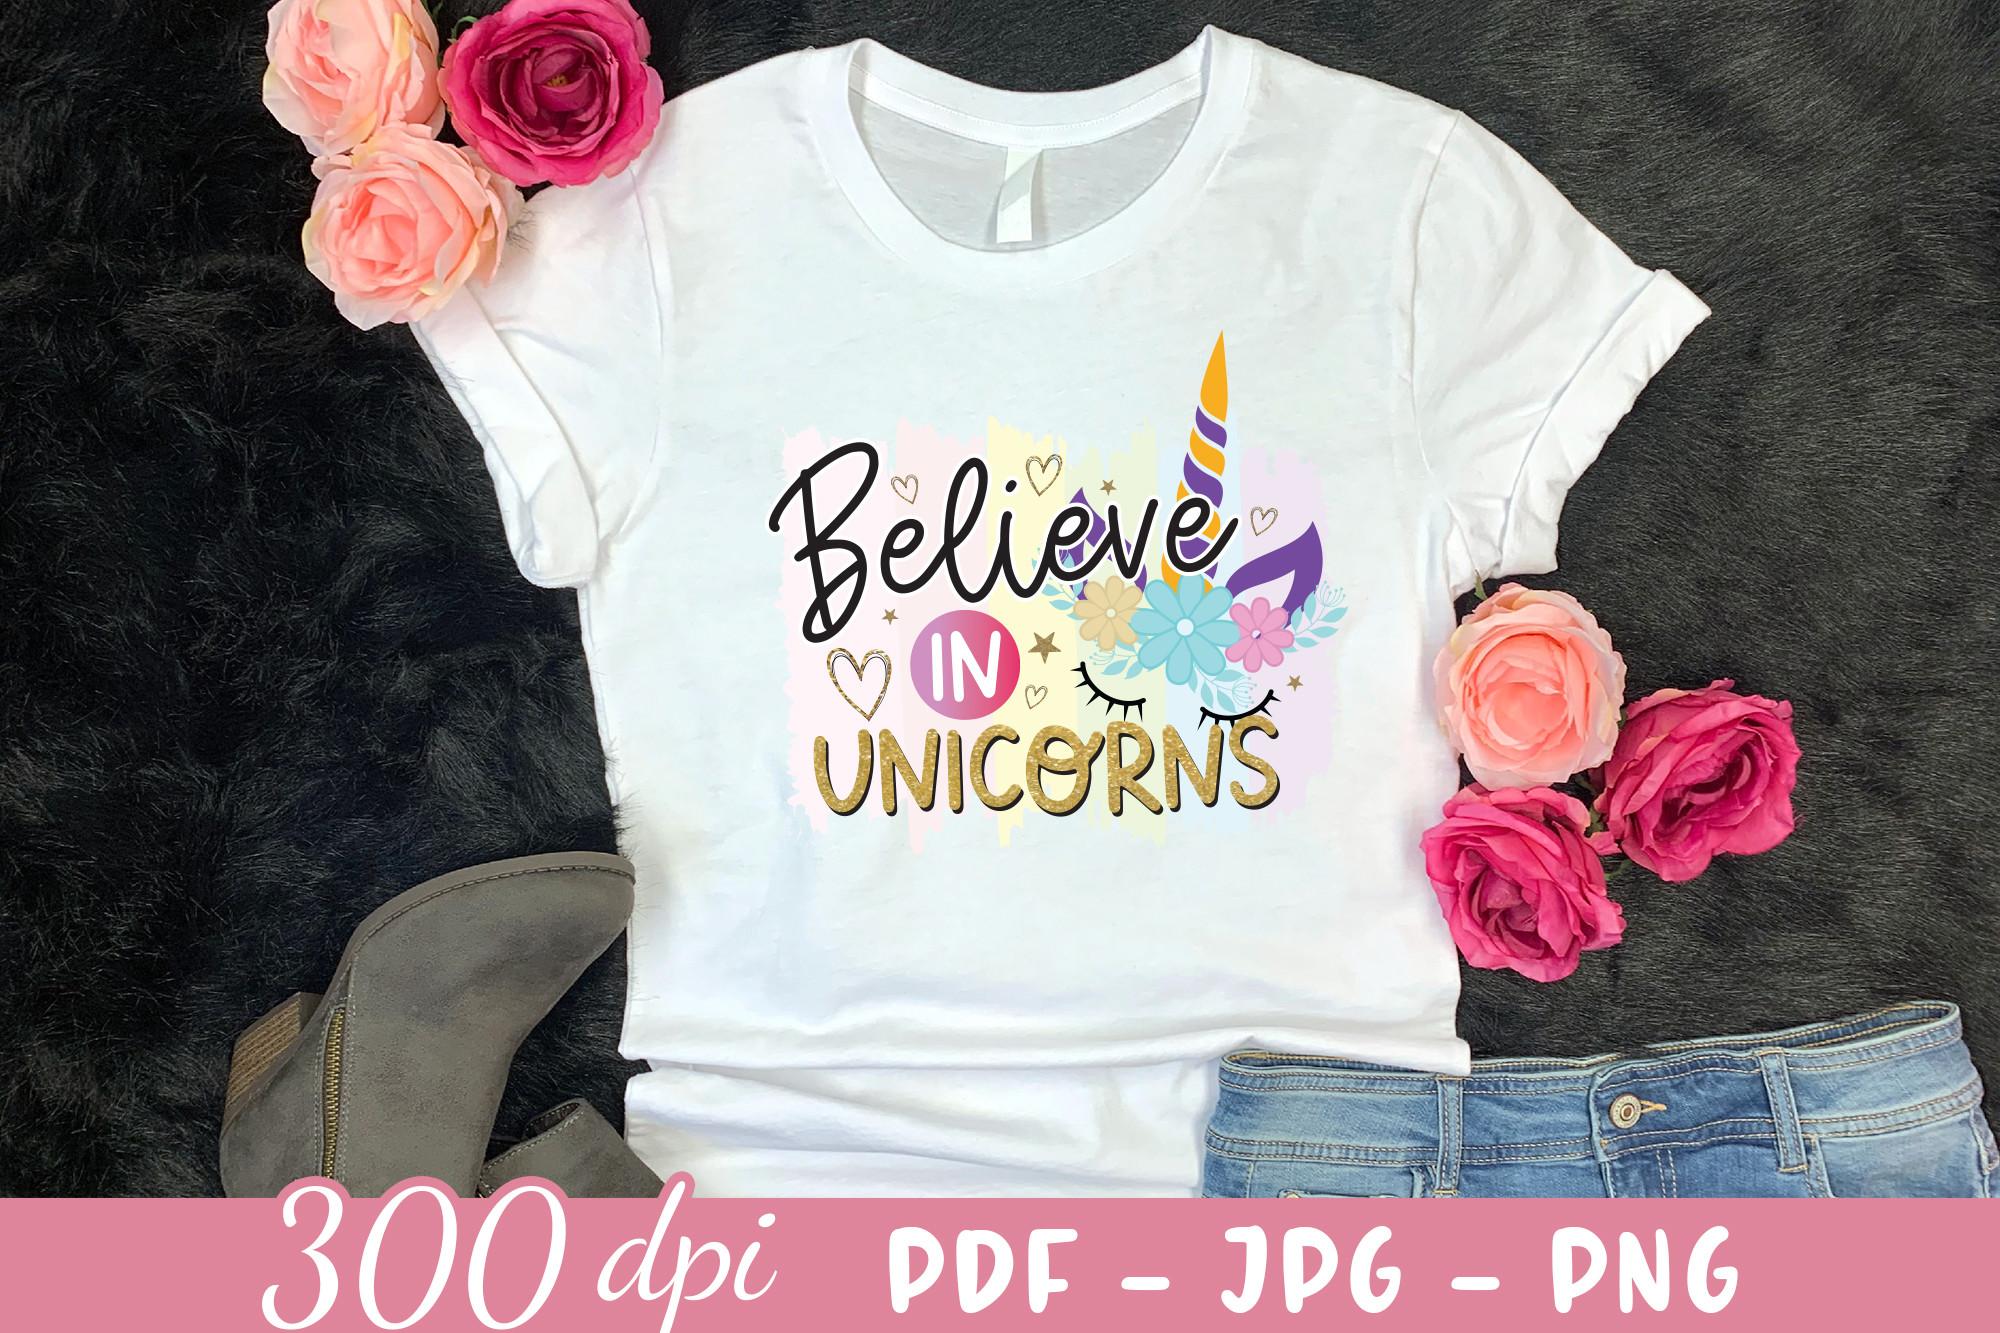 Believe in Unicorns PNG, Unicorn PNG